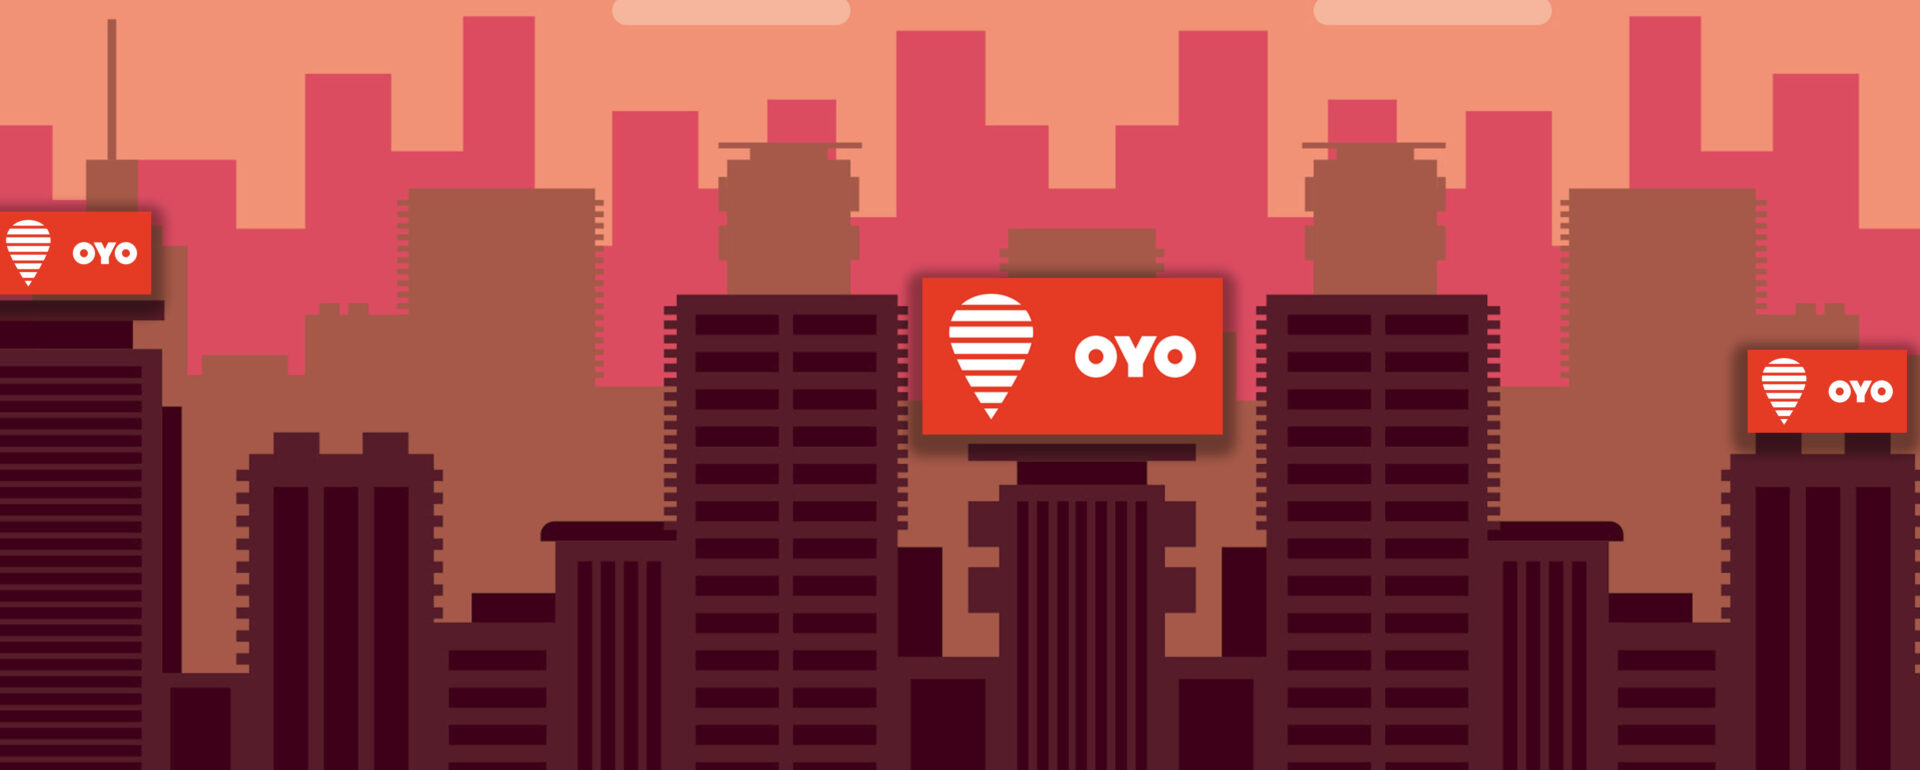 Oyo Rooms: A Brand Every Traveller Needs